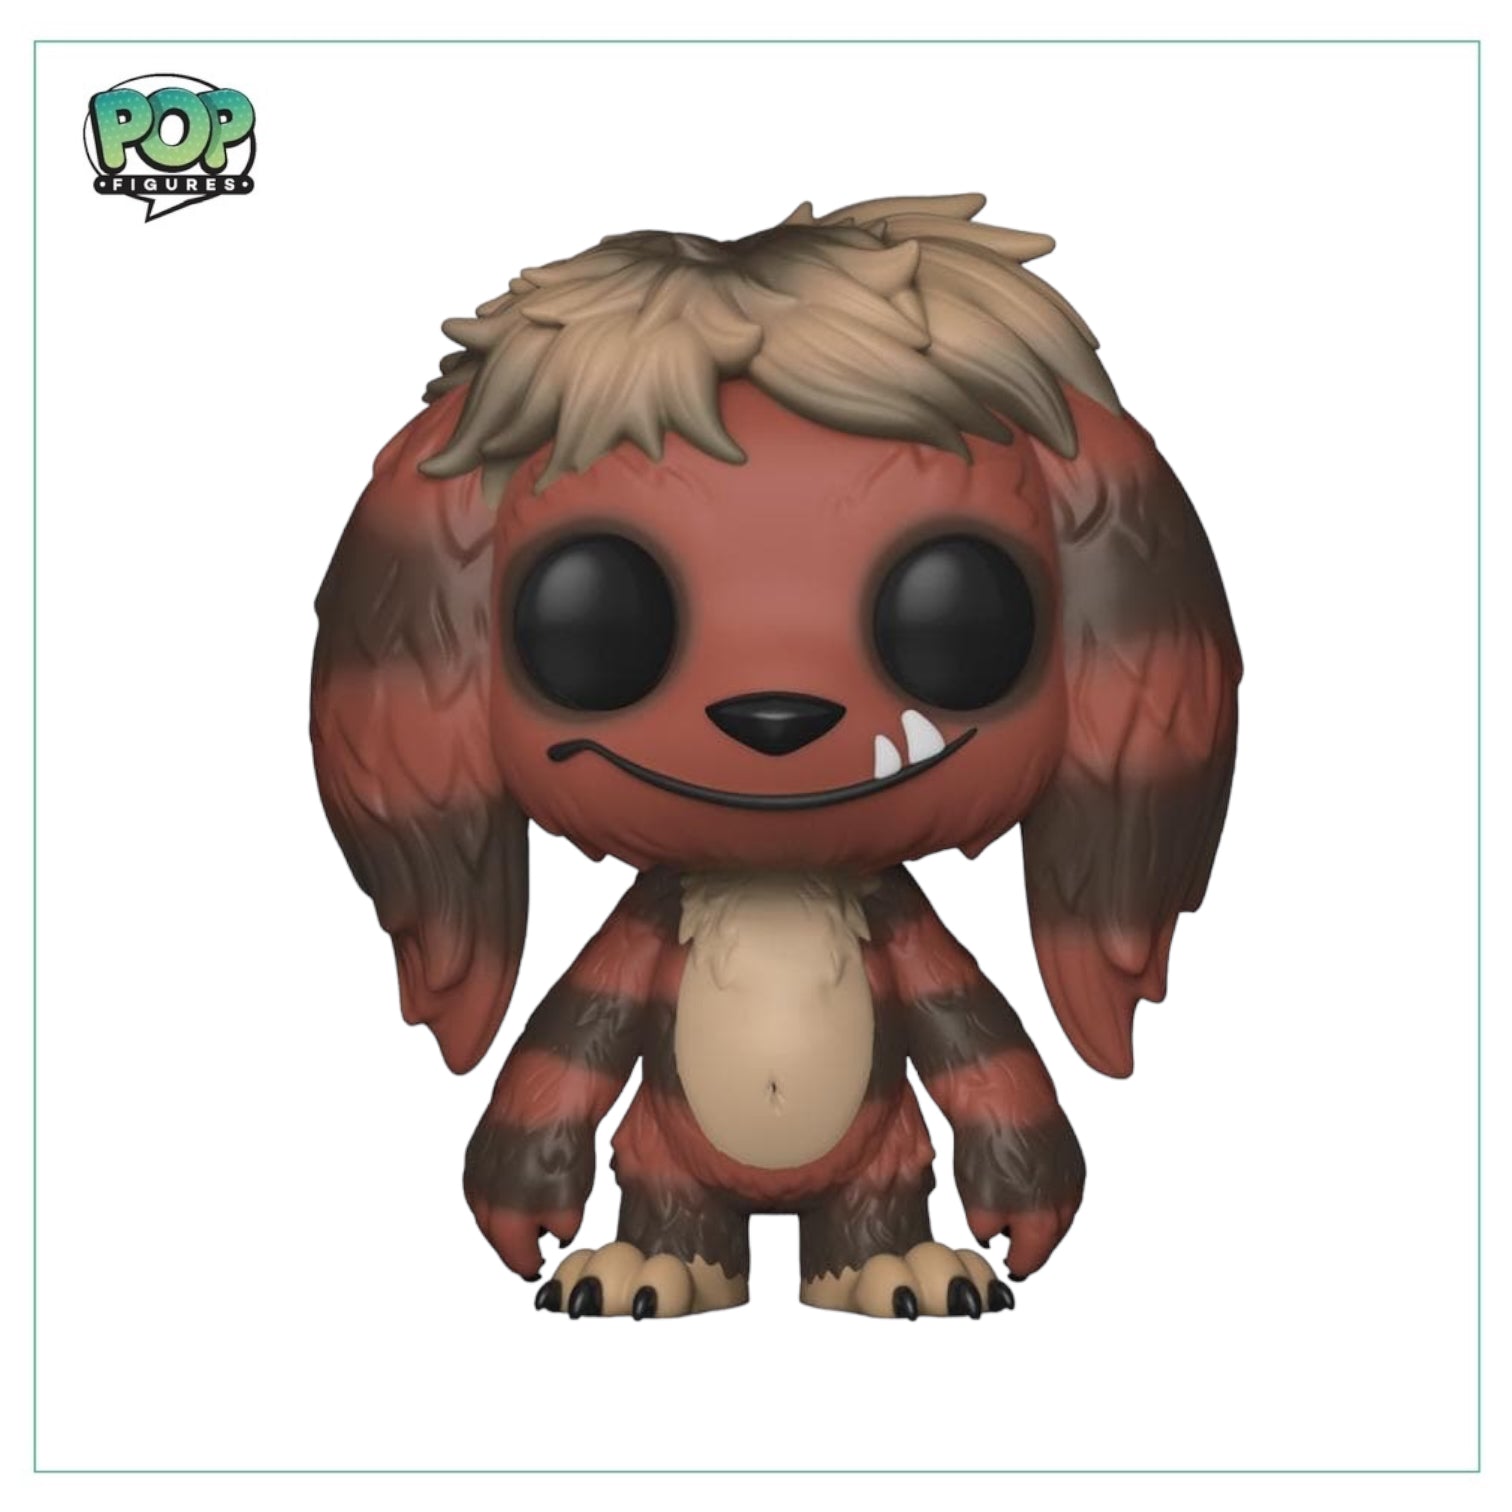 Snuggle-Tooth (Fall) #03 Funko Pop! - Wetmore Forest